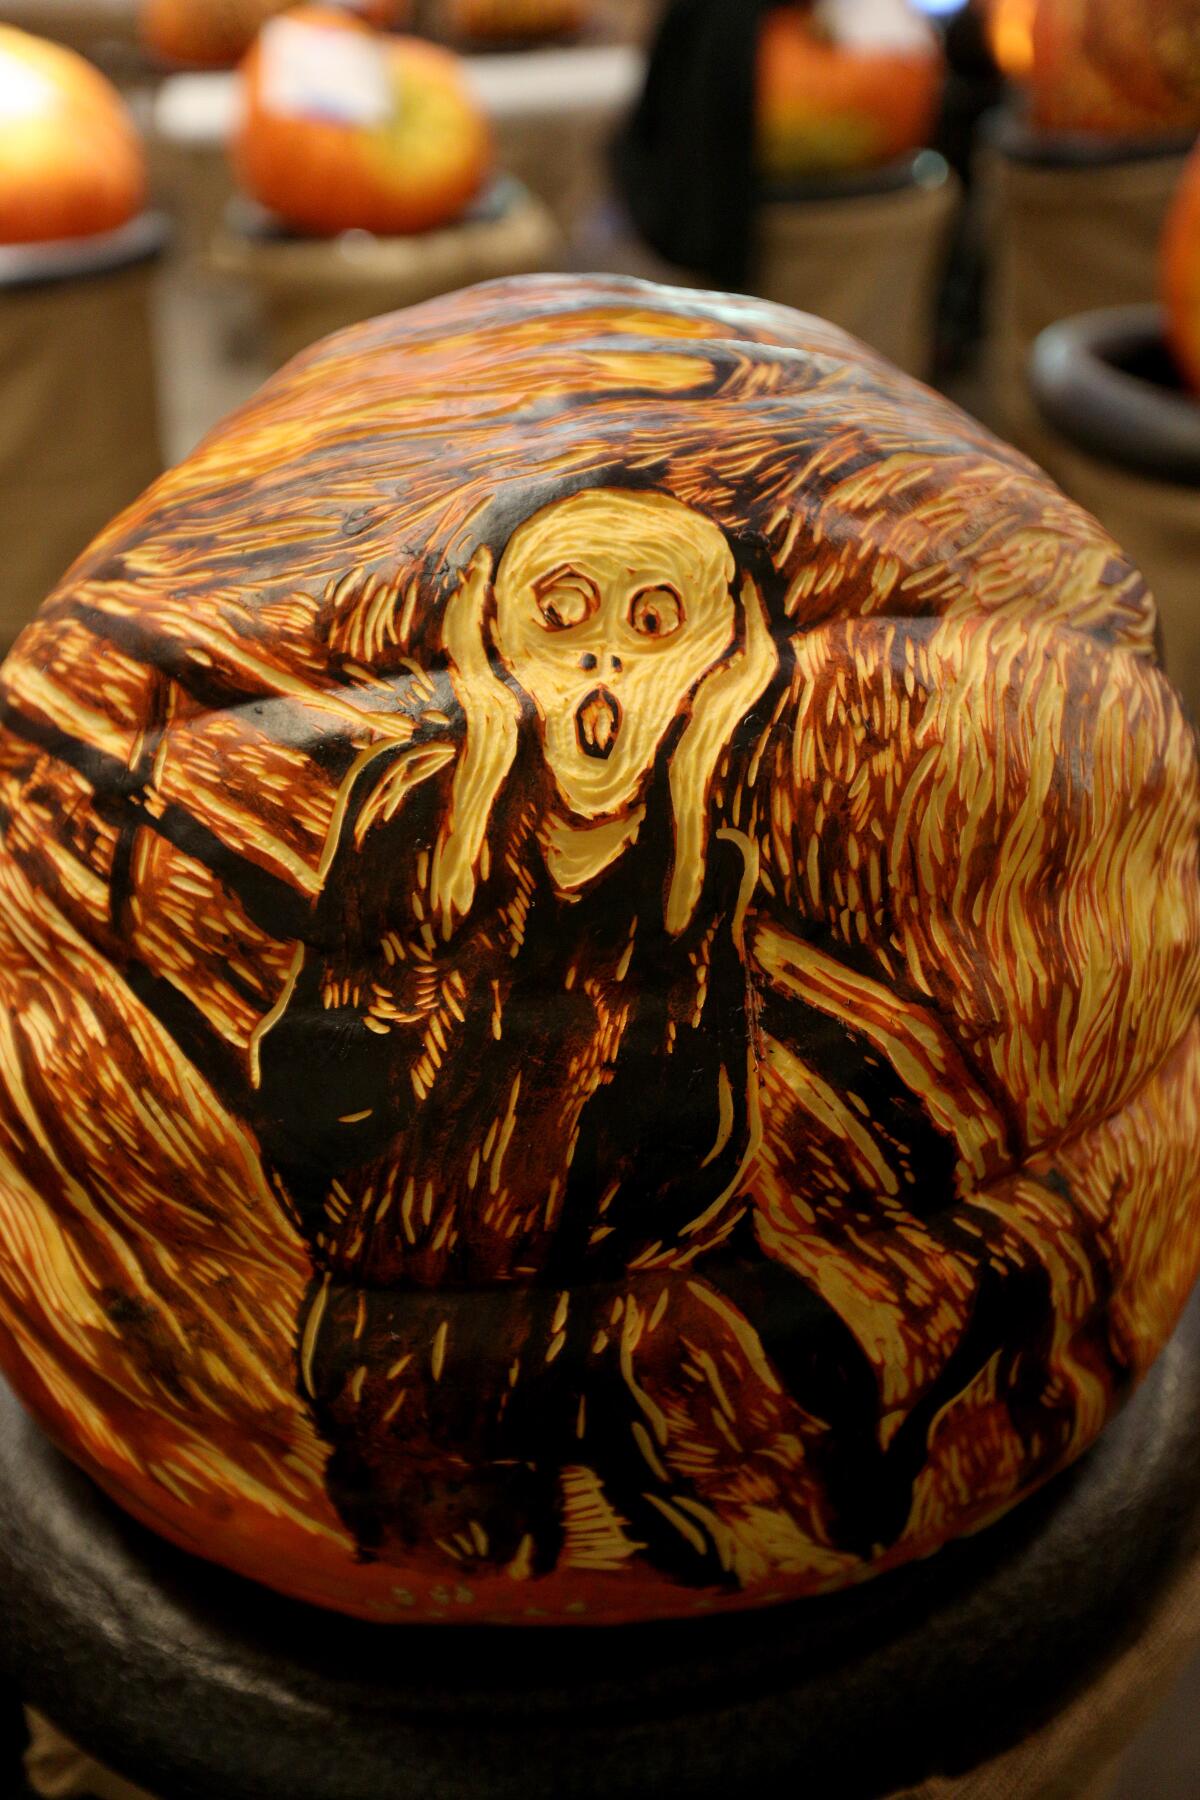 Famous artwork, like Edvard Munch's "The Scream" has been duplicated on 75 behemoth pumpkins being featured in Descanso Gardens' Halloween-themed show "Carved," from Oct. 23 to 27.